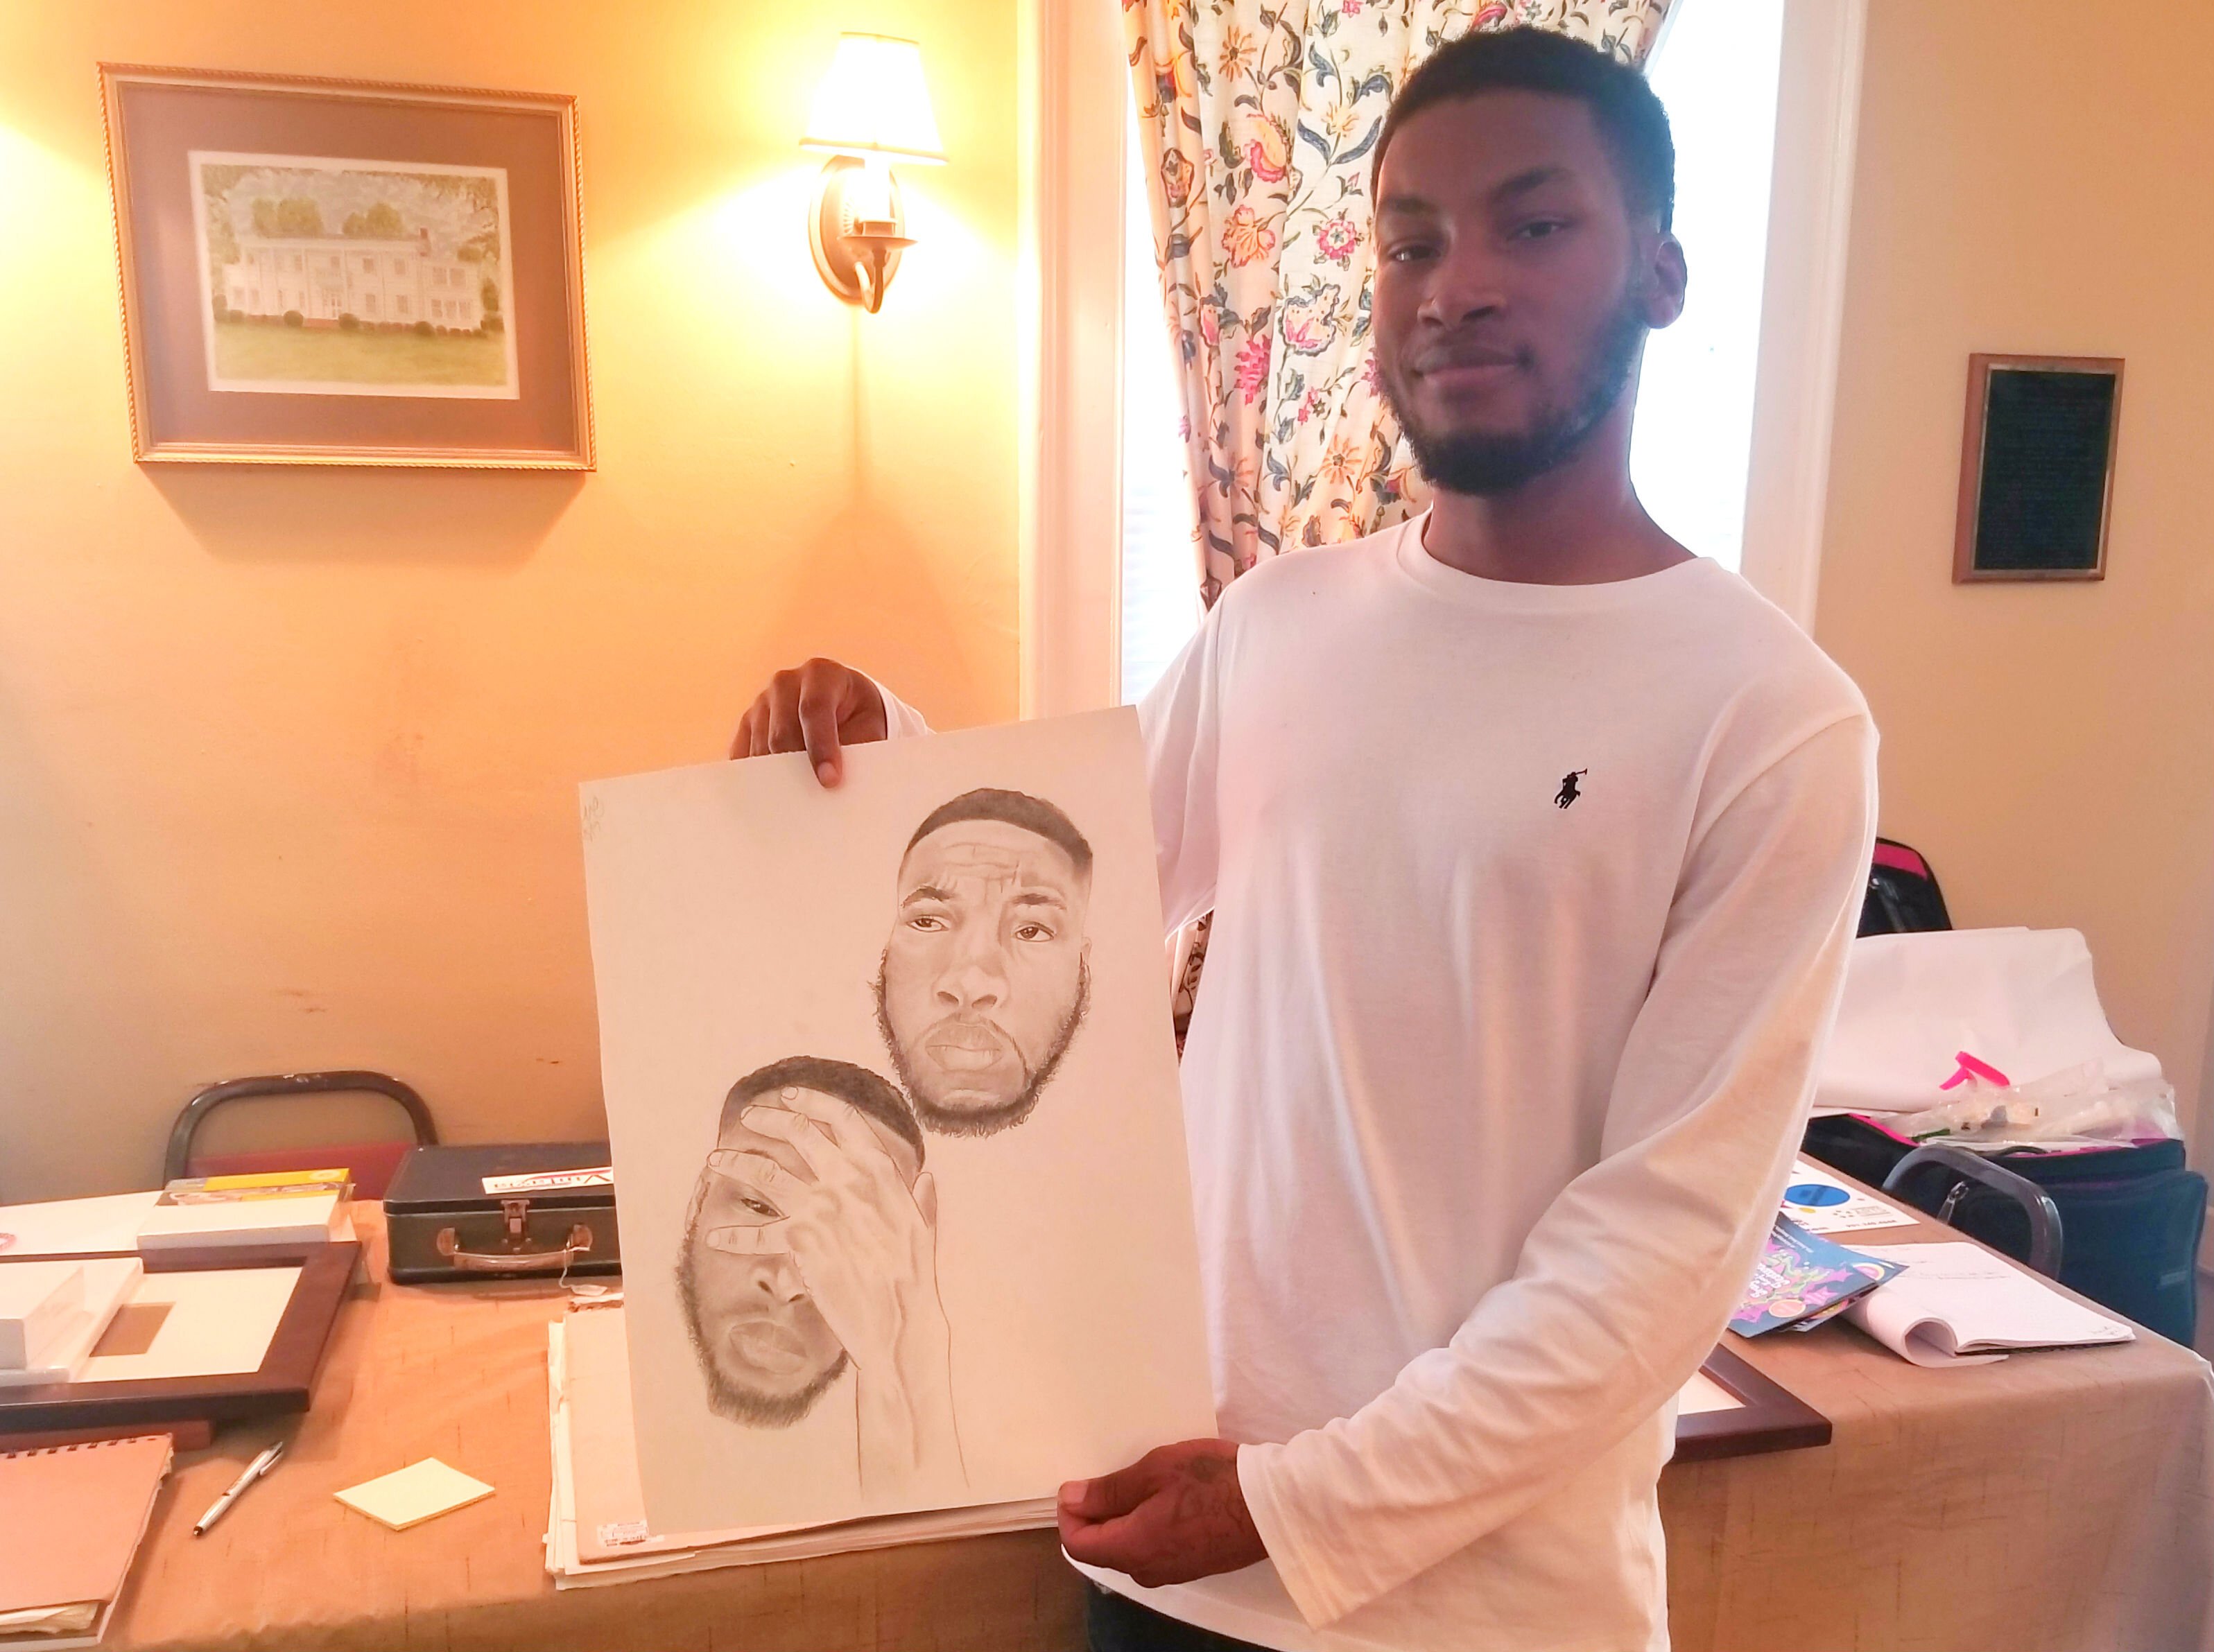 Raleigh resident Dre Morris shows off a work in progress that he will exhibit at the October 5 Frayser Local Arts Festival. (Arkwings Foundation)